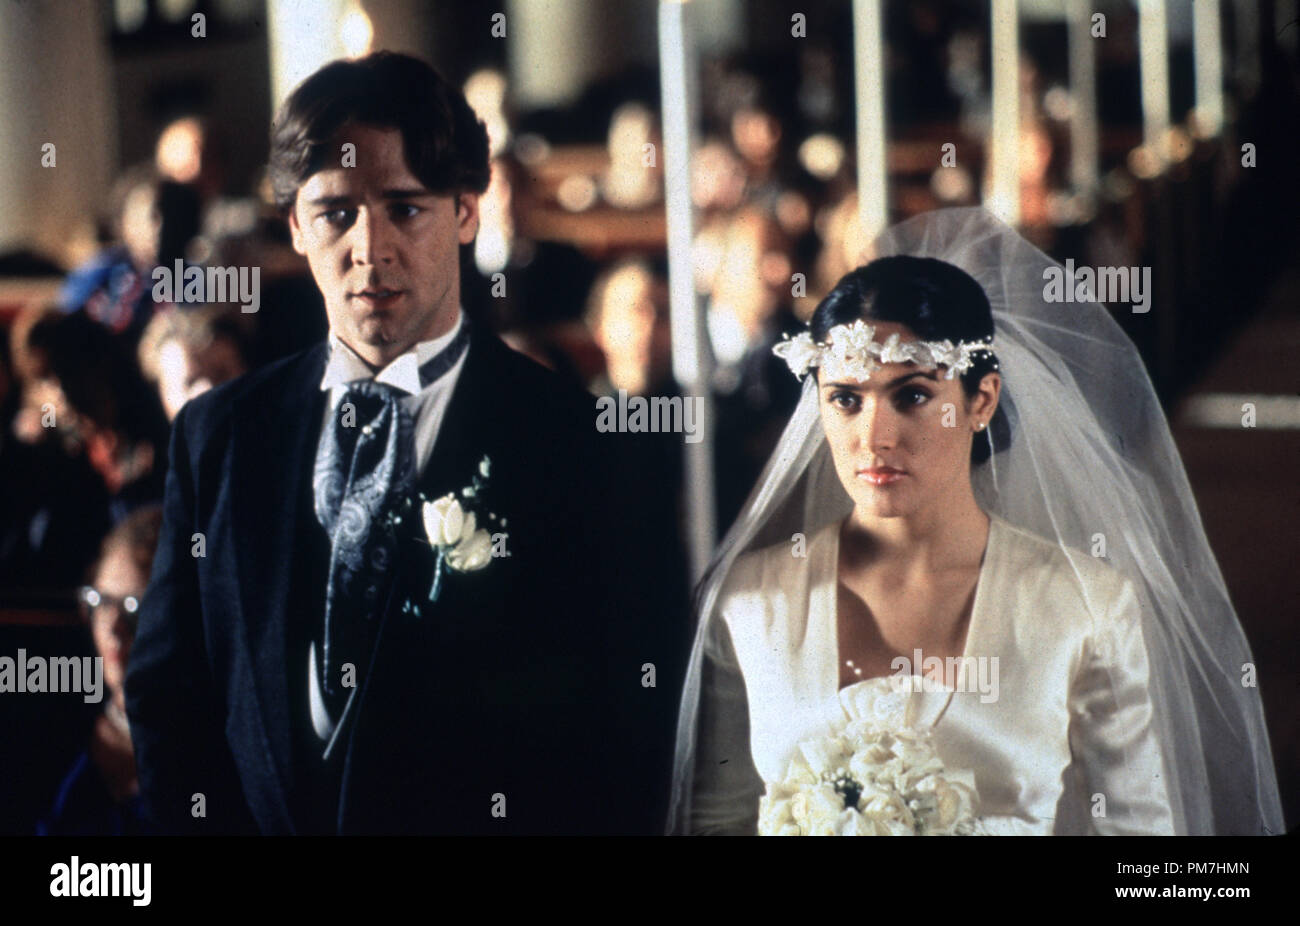 Film Still from "Breaking Up" Russell Crowe, Salma Hayek © 1997 Warner / Regency Enterprise   File Reference # 31013408THA  For Editorial Use Only - All Rights Reserved Stock Photo